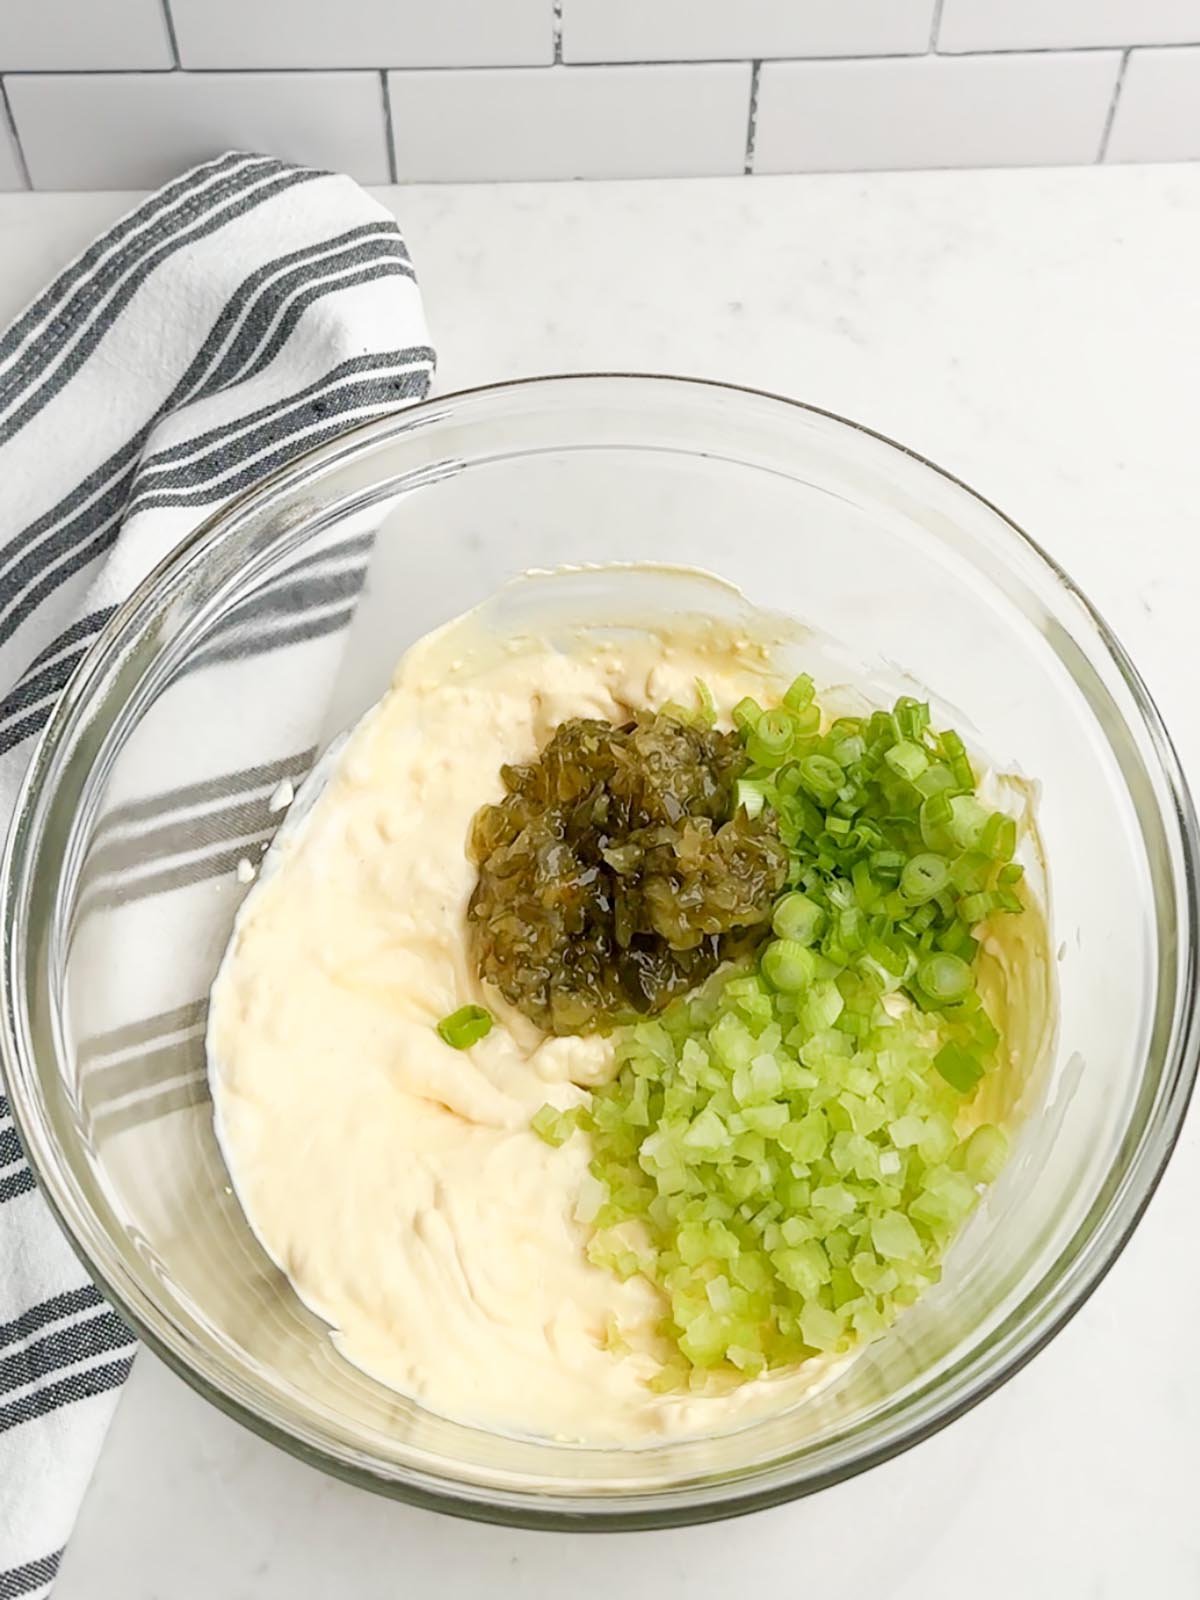 mayo mixture, relish, green onions, and celery in a clear bowl